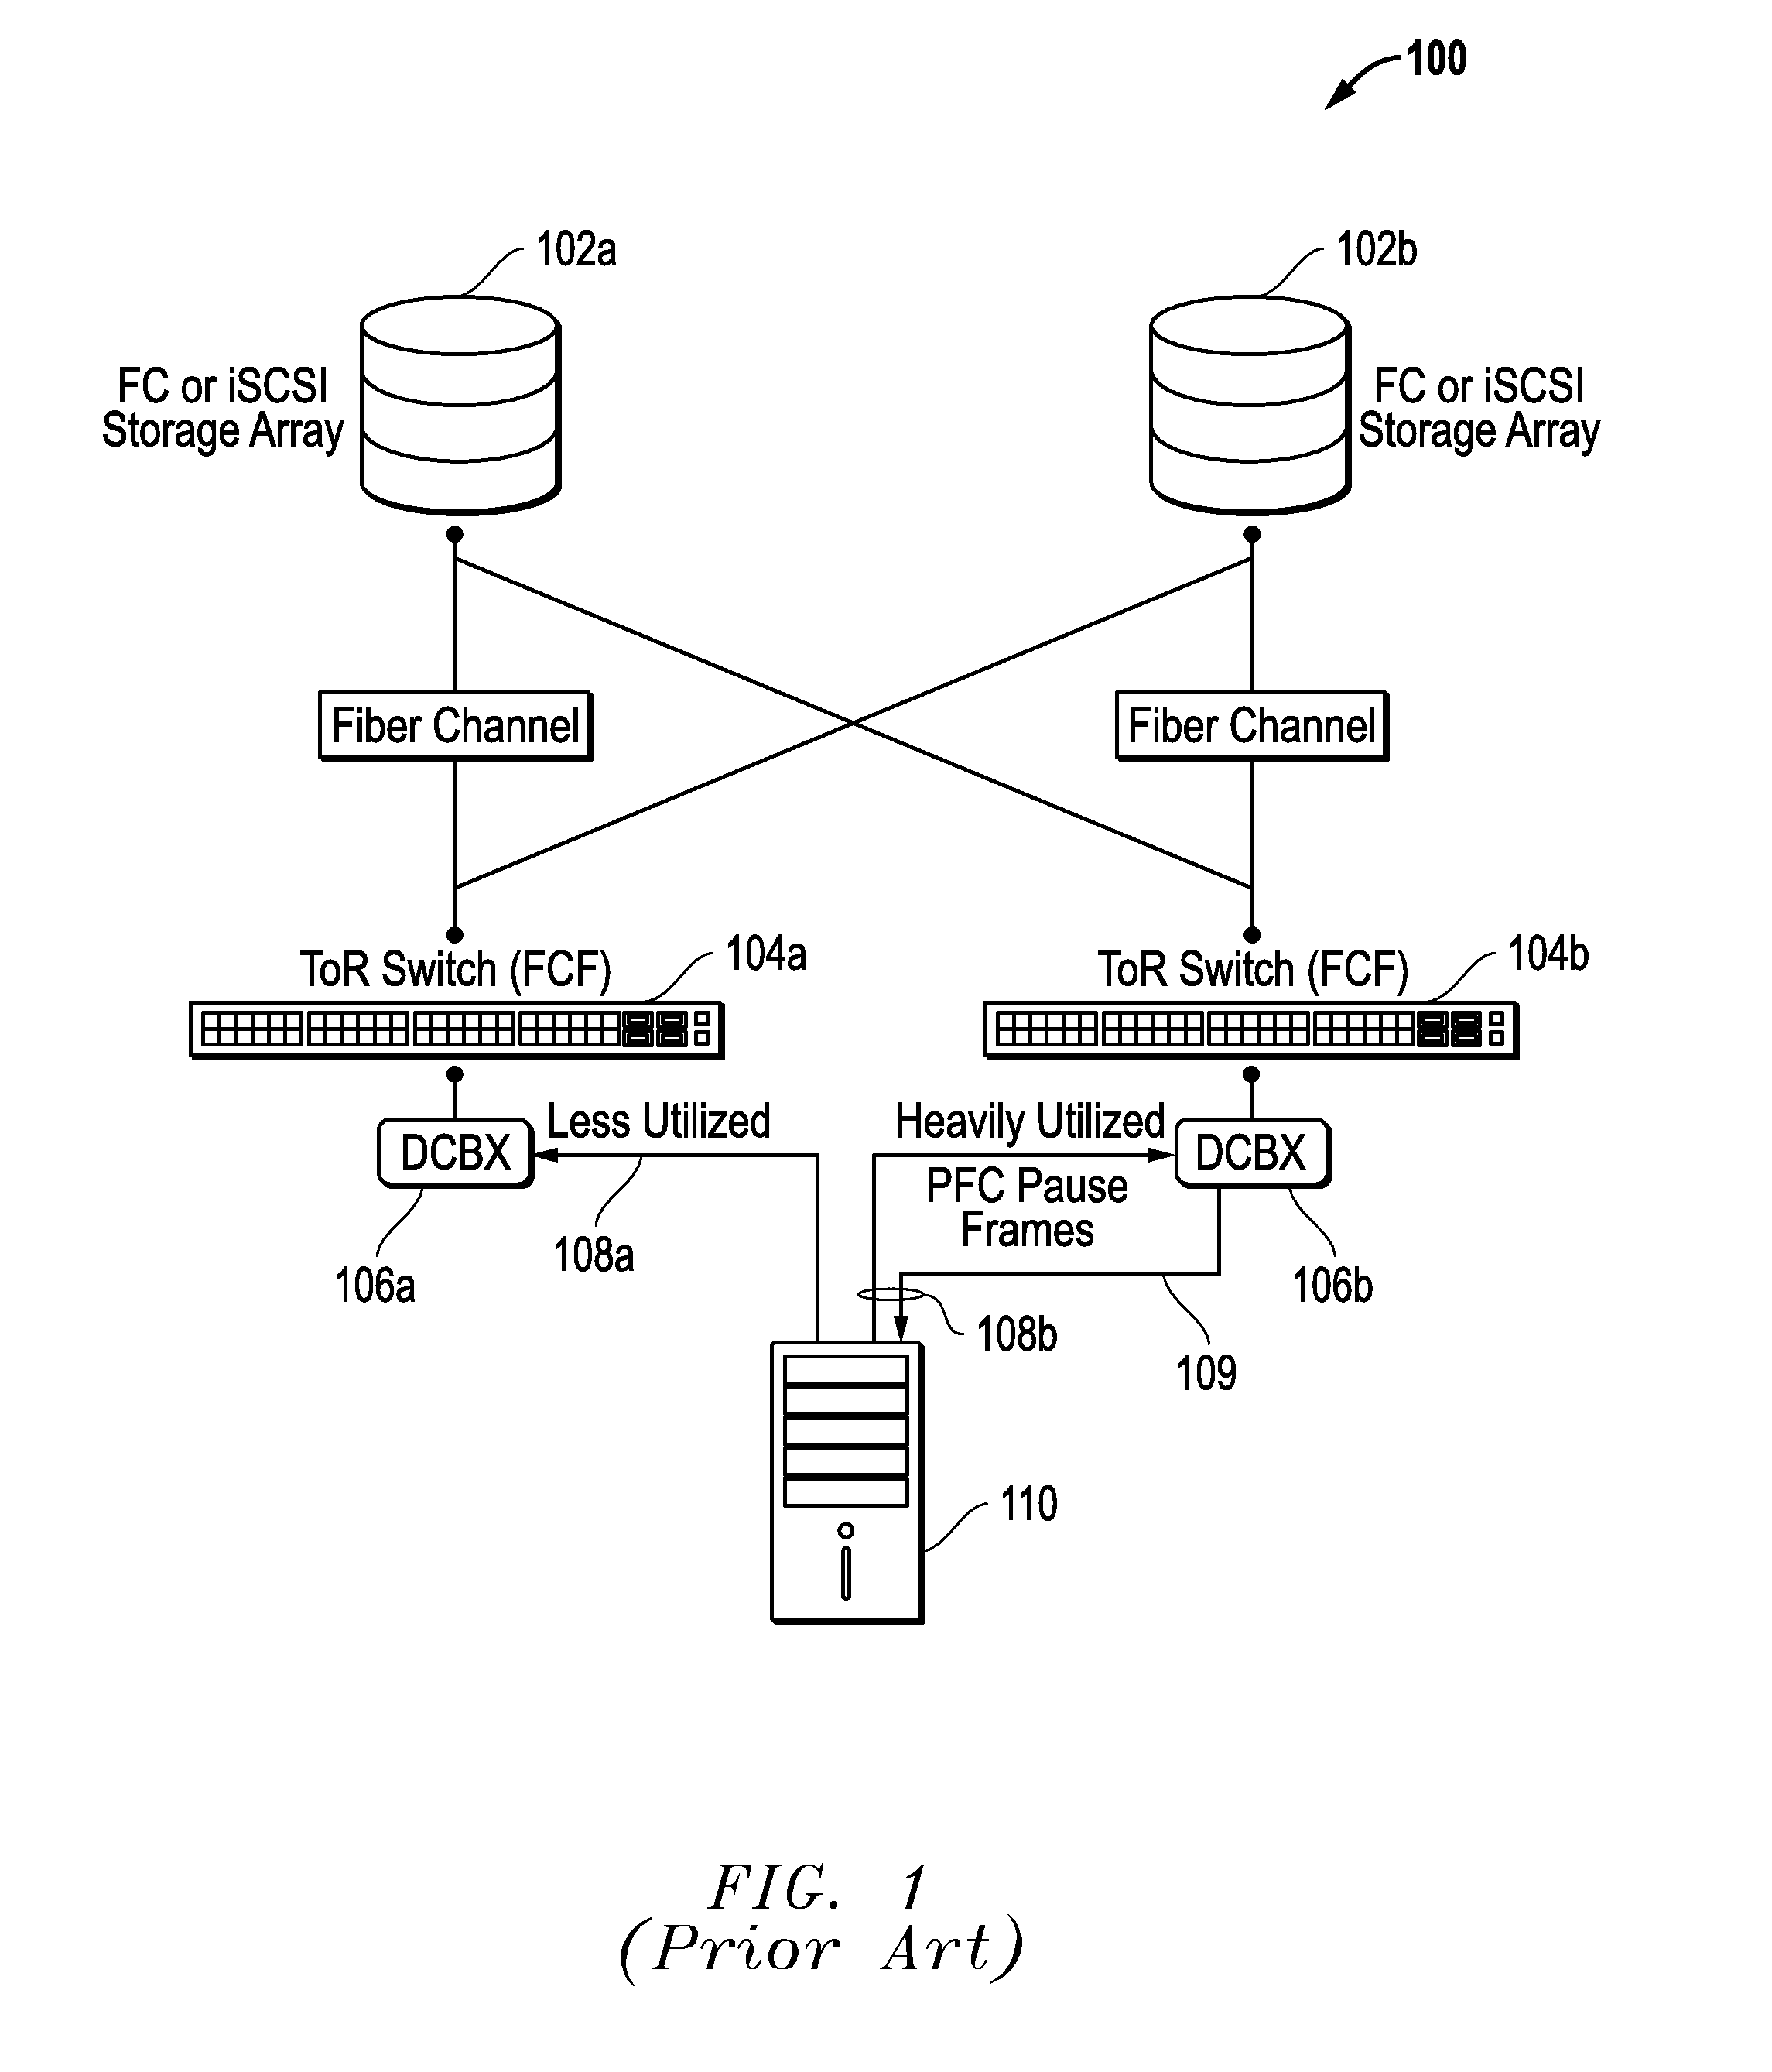 Systems And Methods For Native Network Interface Controller (NIC) Teaming Load Balancing